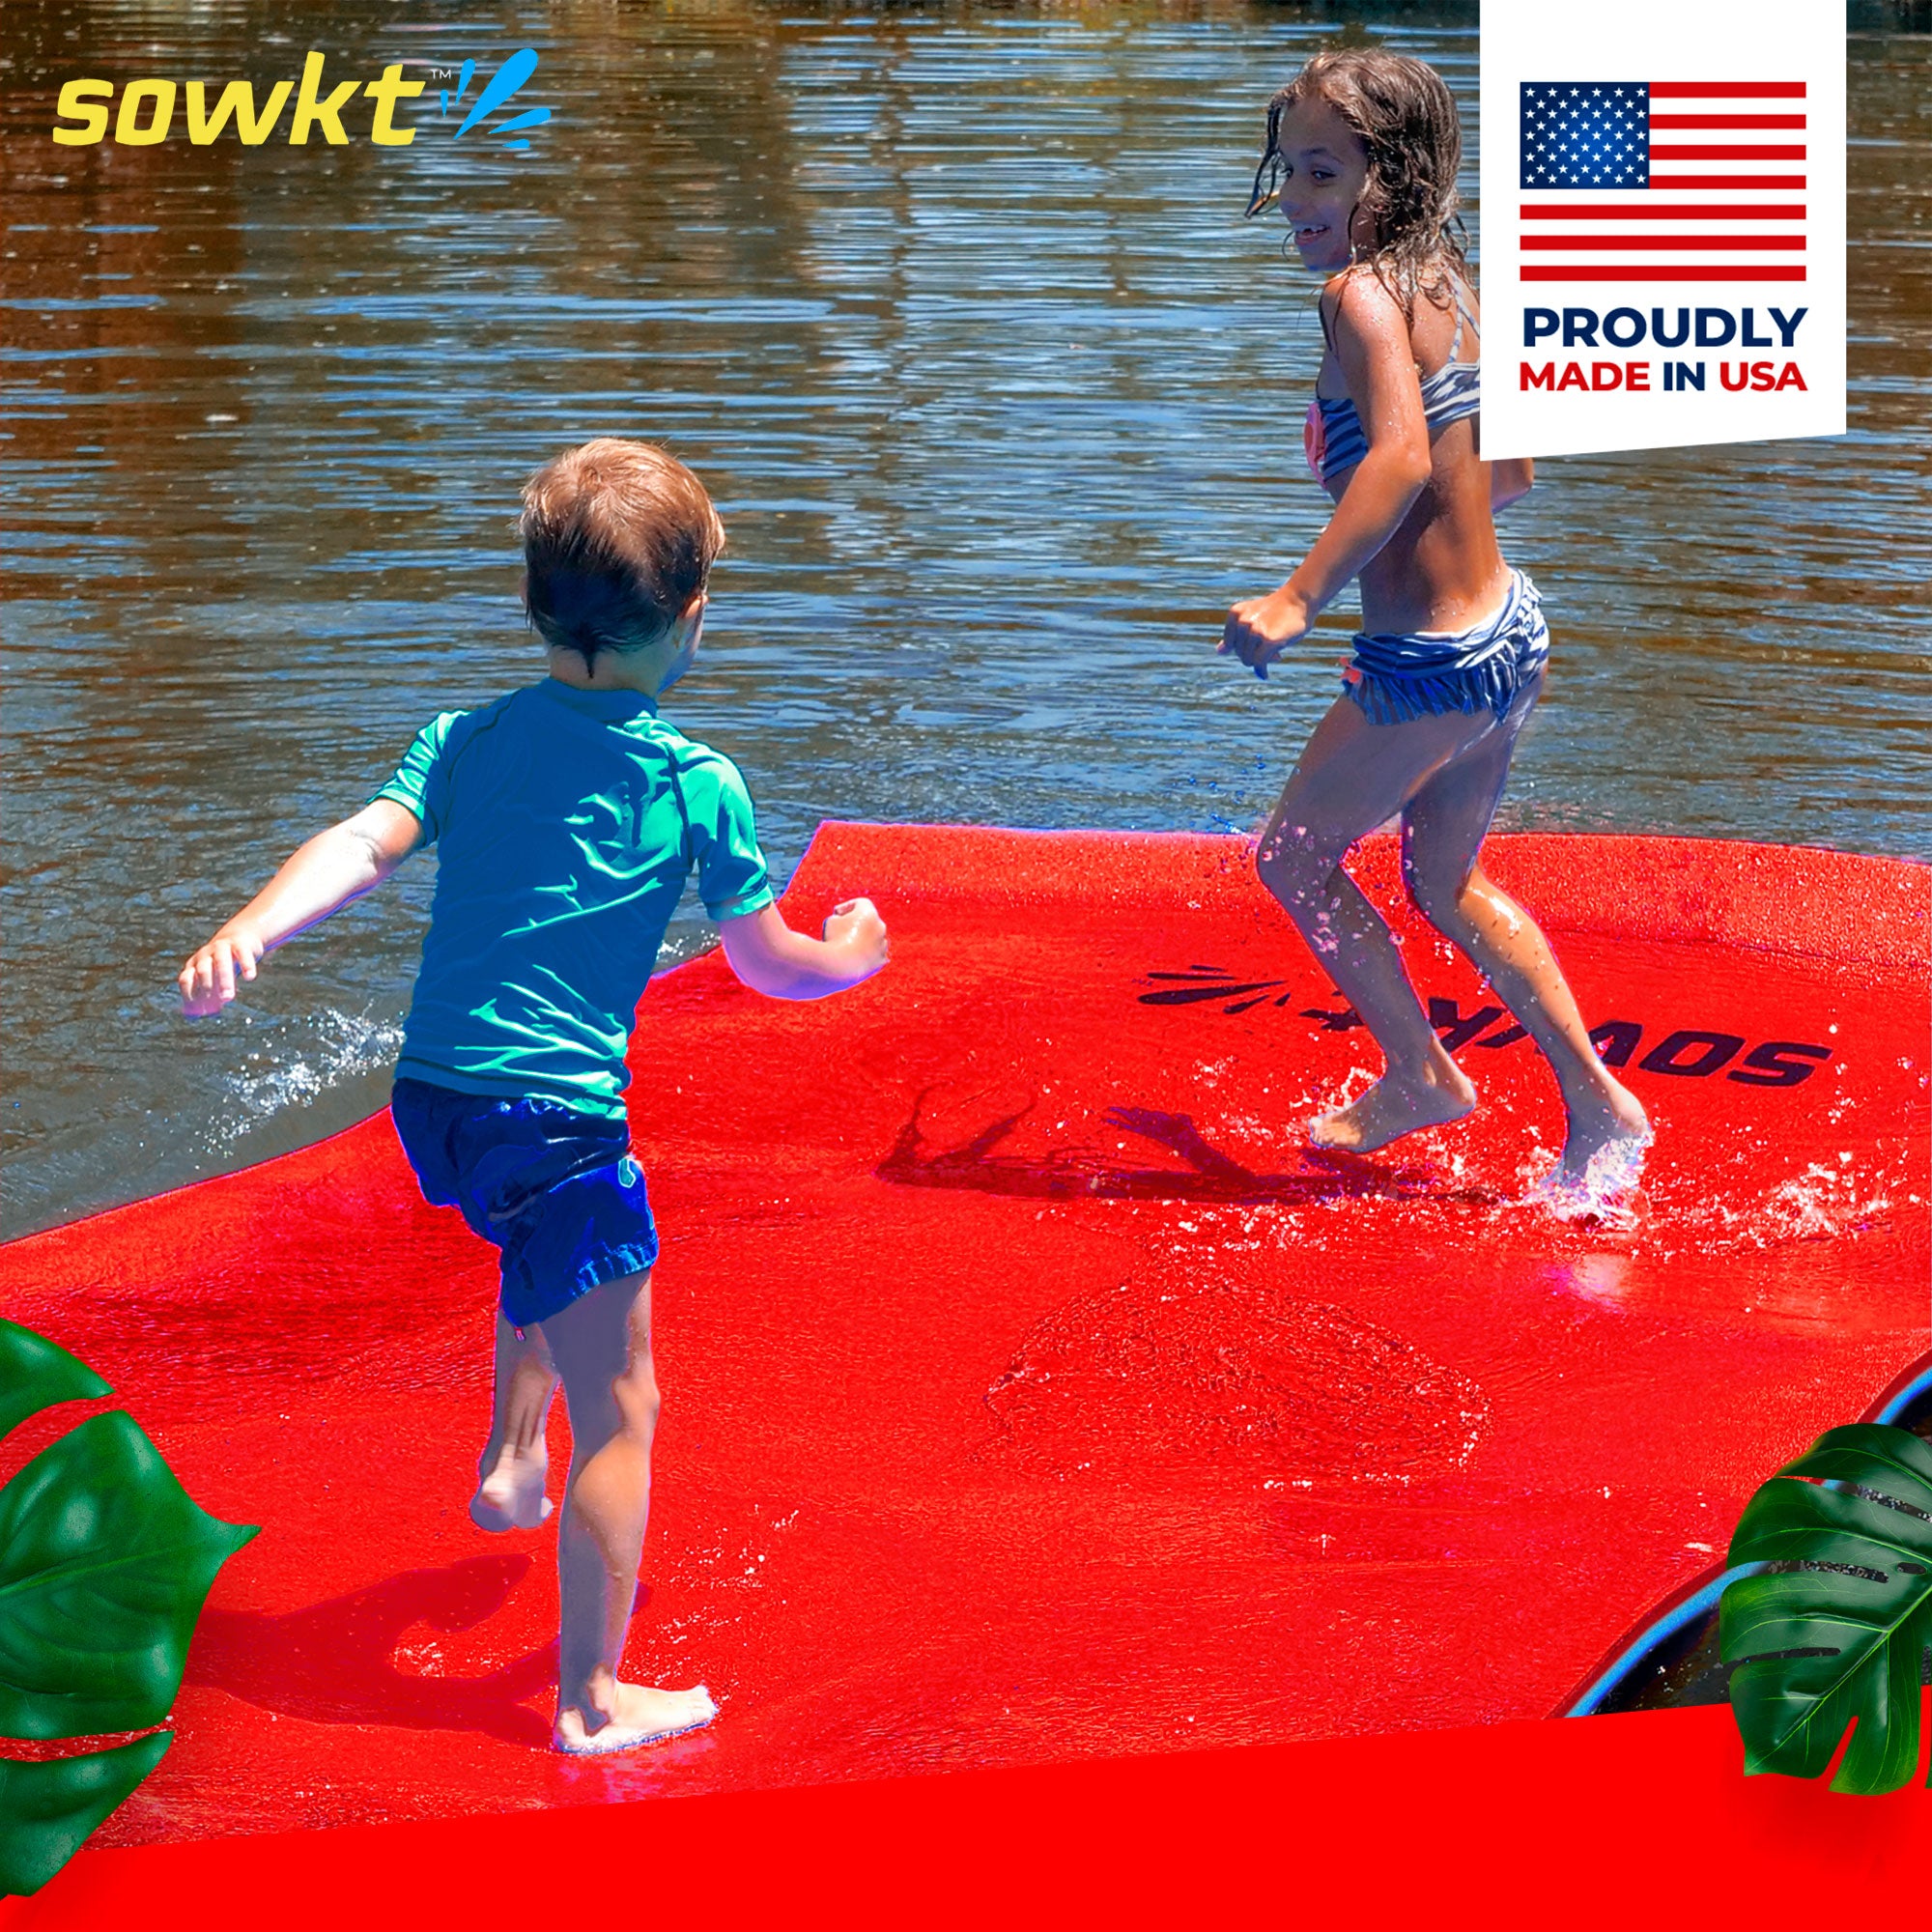 Floating Island For Lakes or Pools - 9 X 6 FEET (RED/POWDER BLUE)